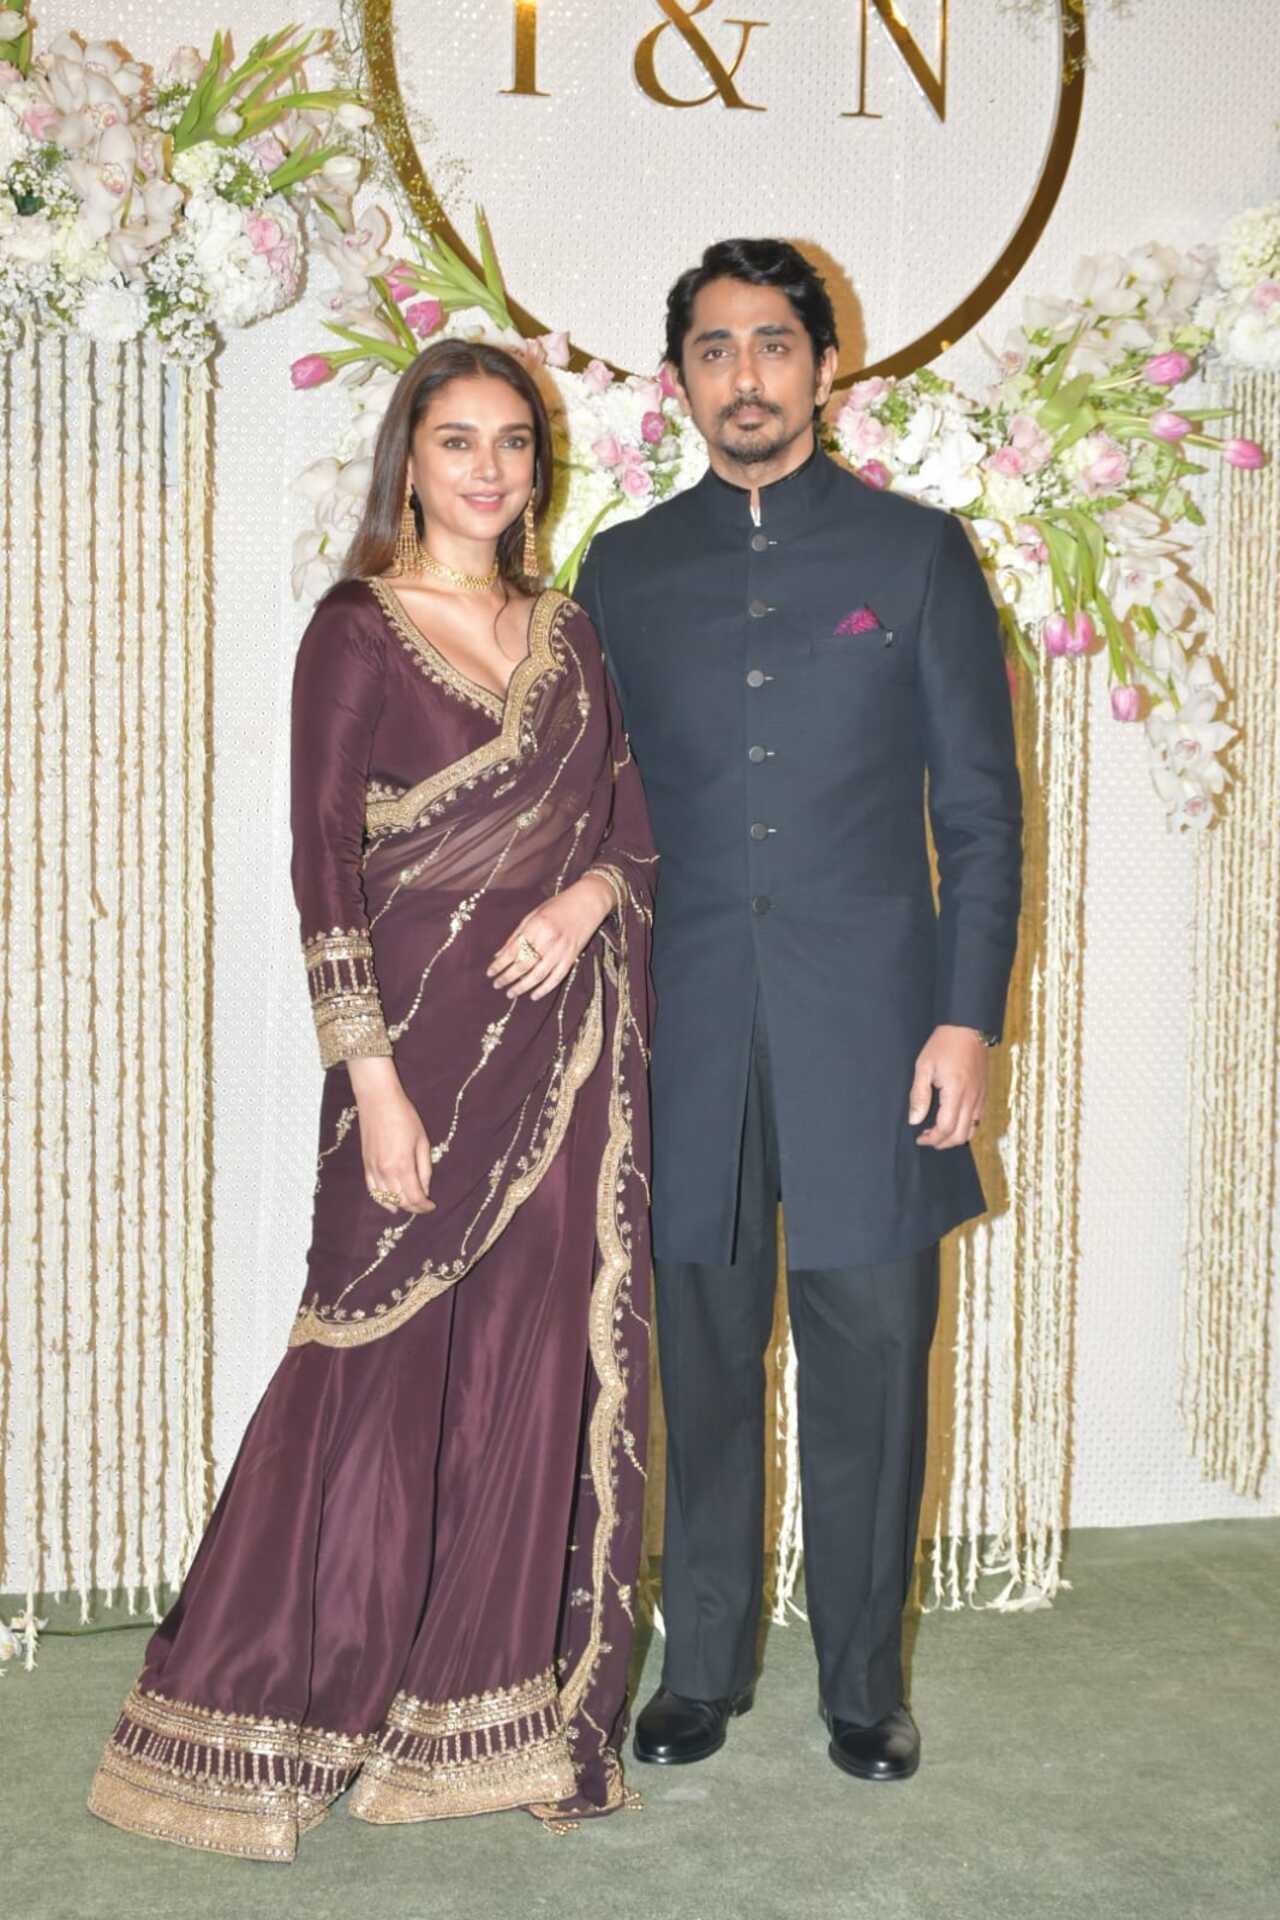 Aditi Rao Hydari never misses a beat when it comes to Indian traditional wear. She donned a magenta saree-styled lehenga for the night and looked gracious as ever. She was accompanied by her boyfriend and actor Siddharth